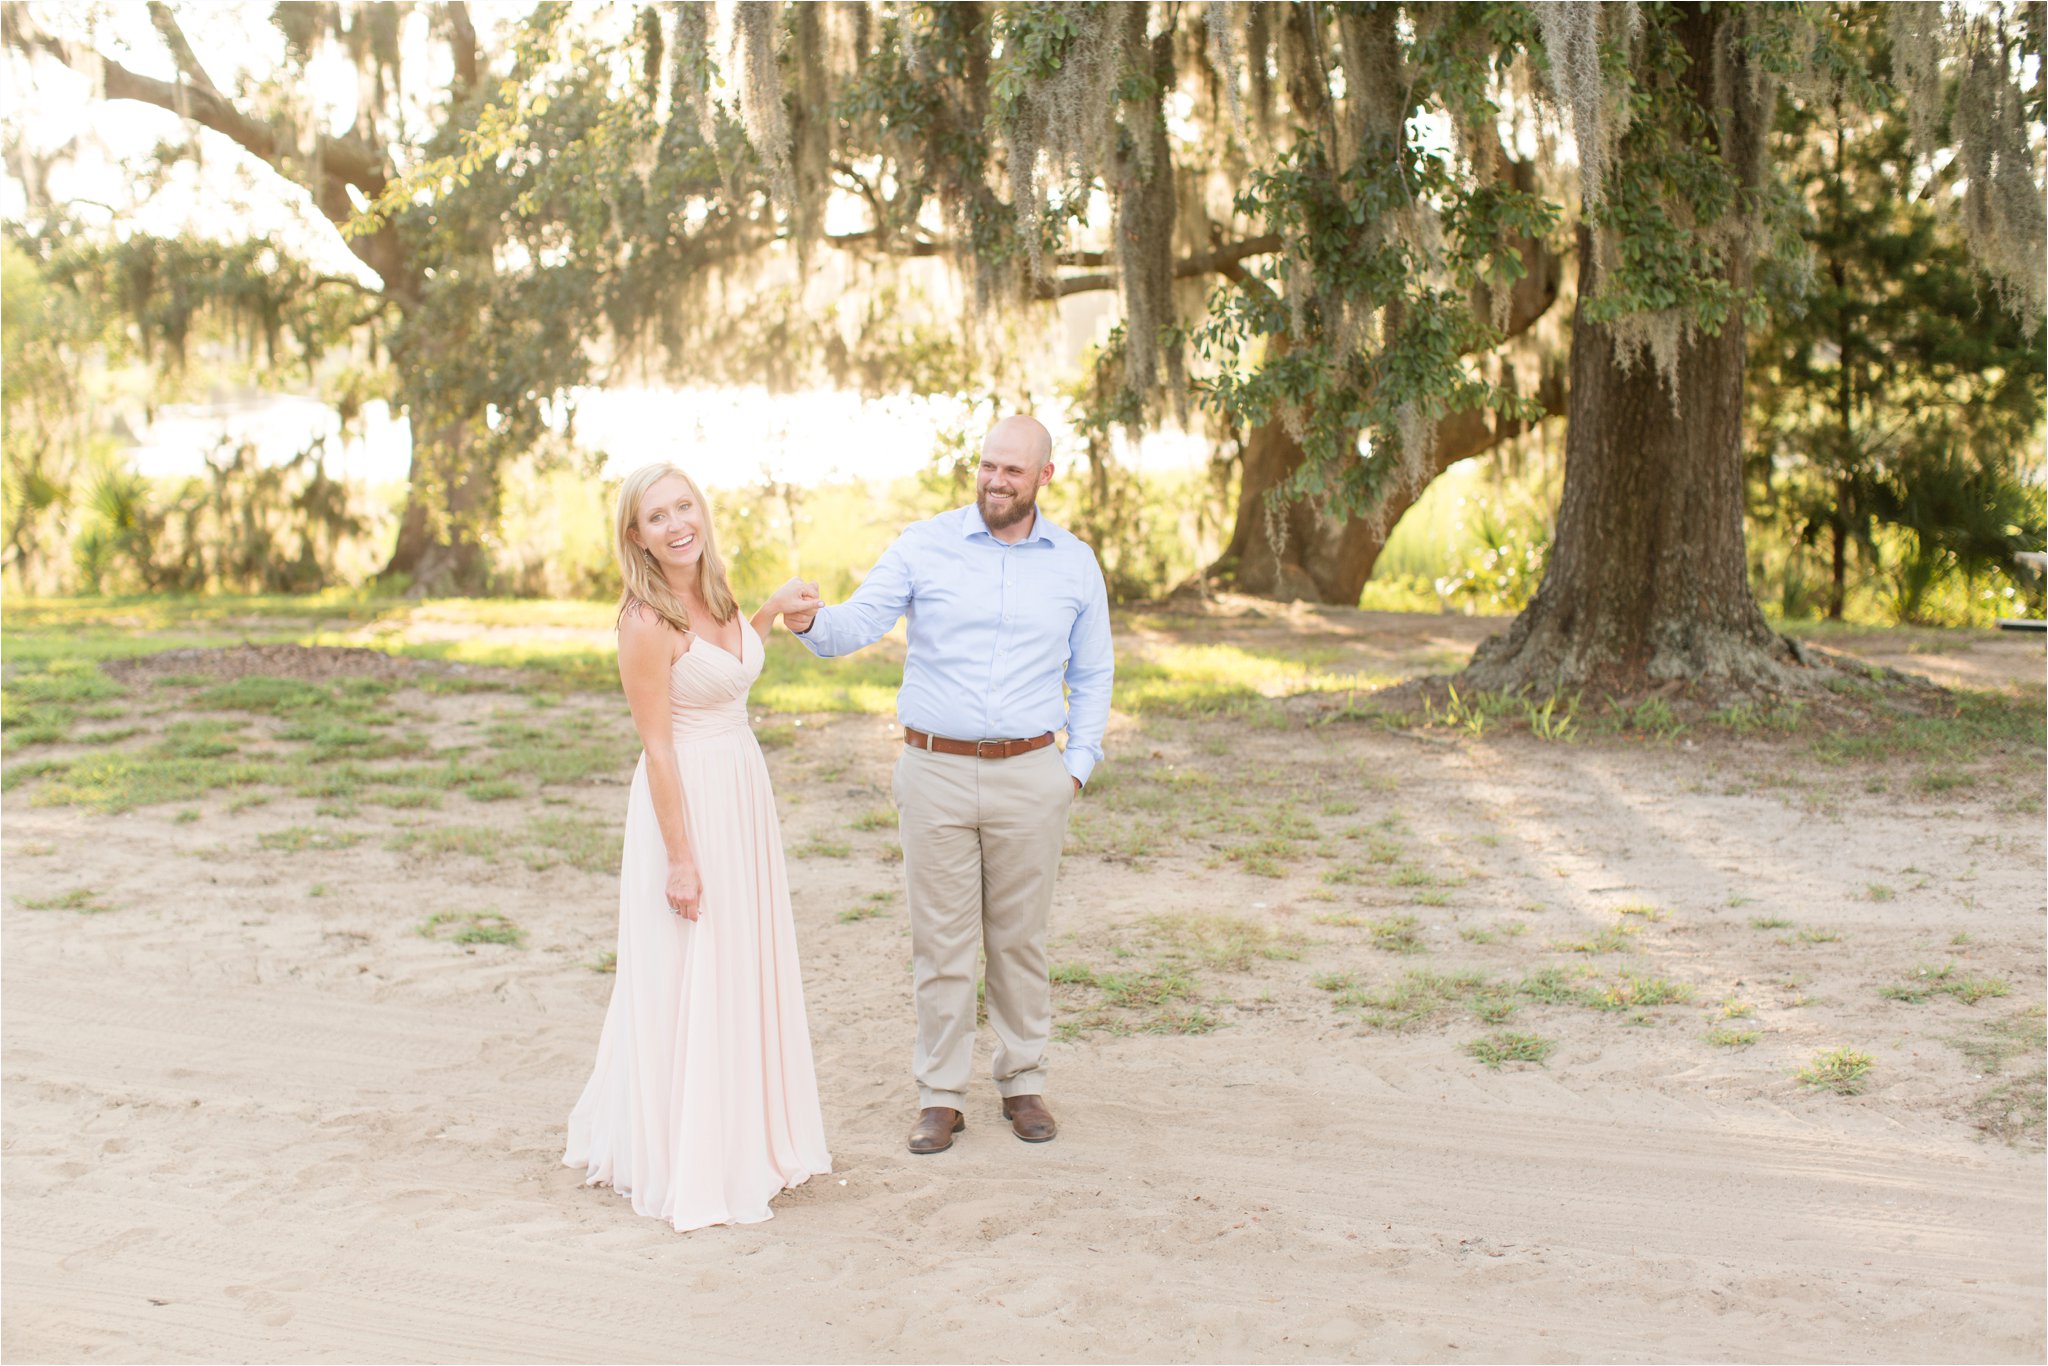 Boone Hall Engagement Session | Boone Hall Wedding Photographer | Charleston Wedding Photographer | Christa Rene Photography